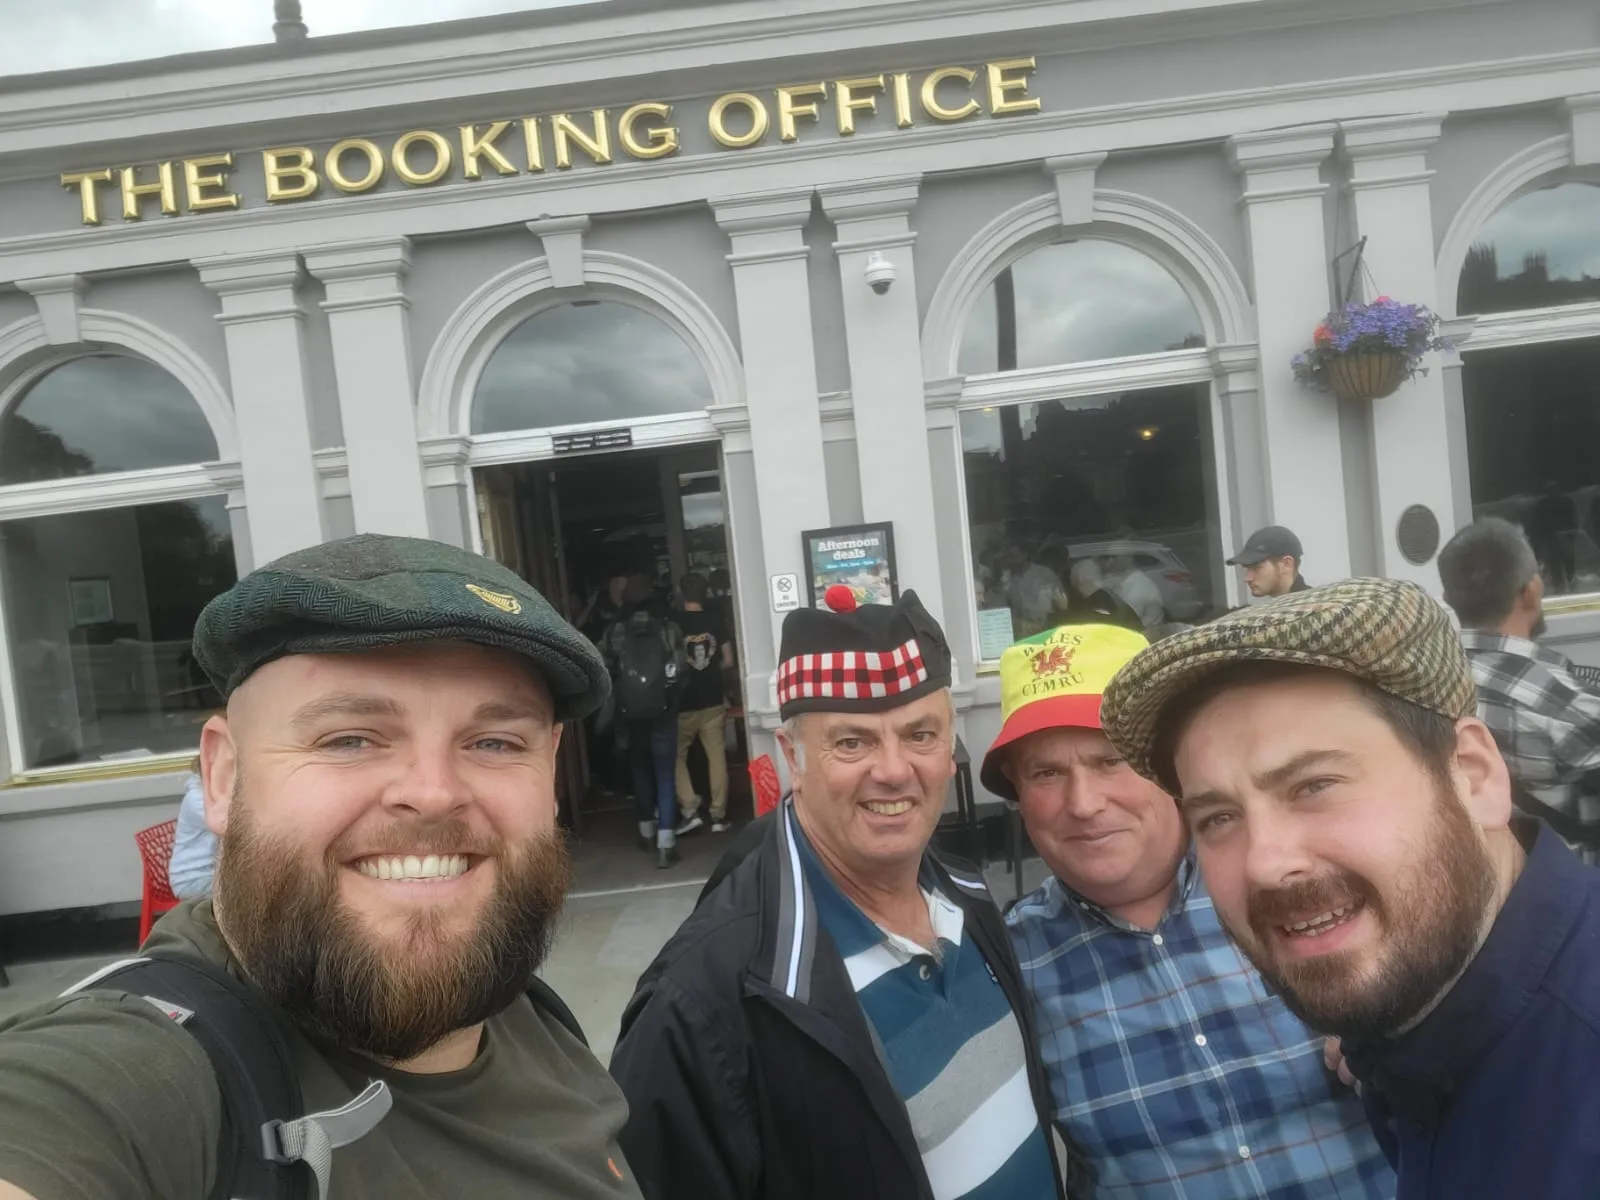 (left to right) Mike (Ireland), Tony (Scotland), ‘Doz’ (Wales) and Dafydd (England) outside the Booking Office pub.